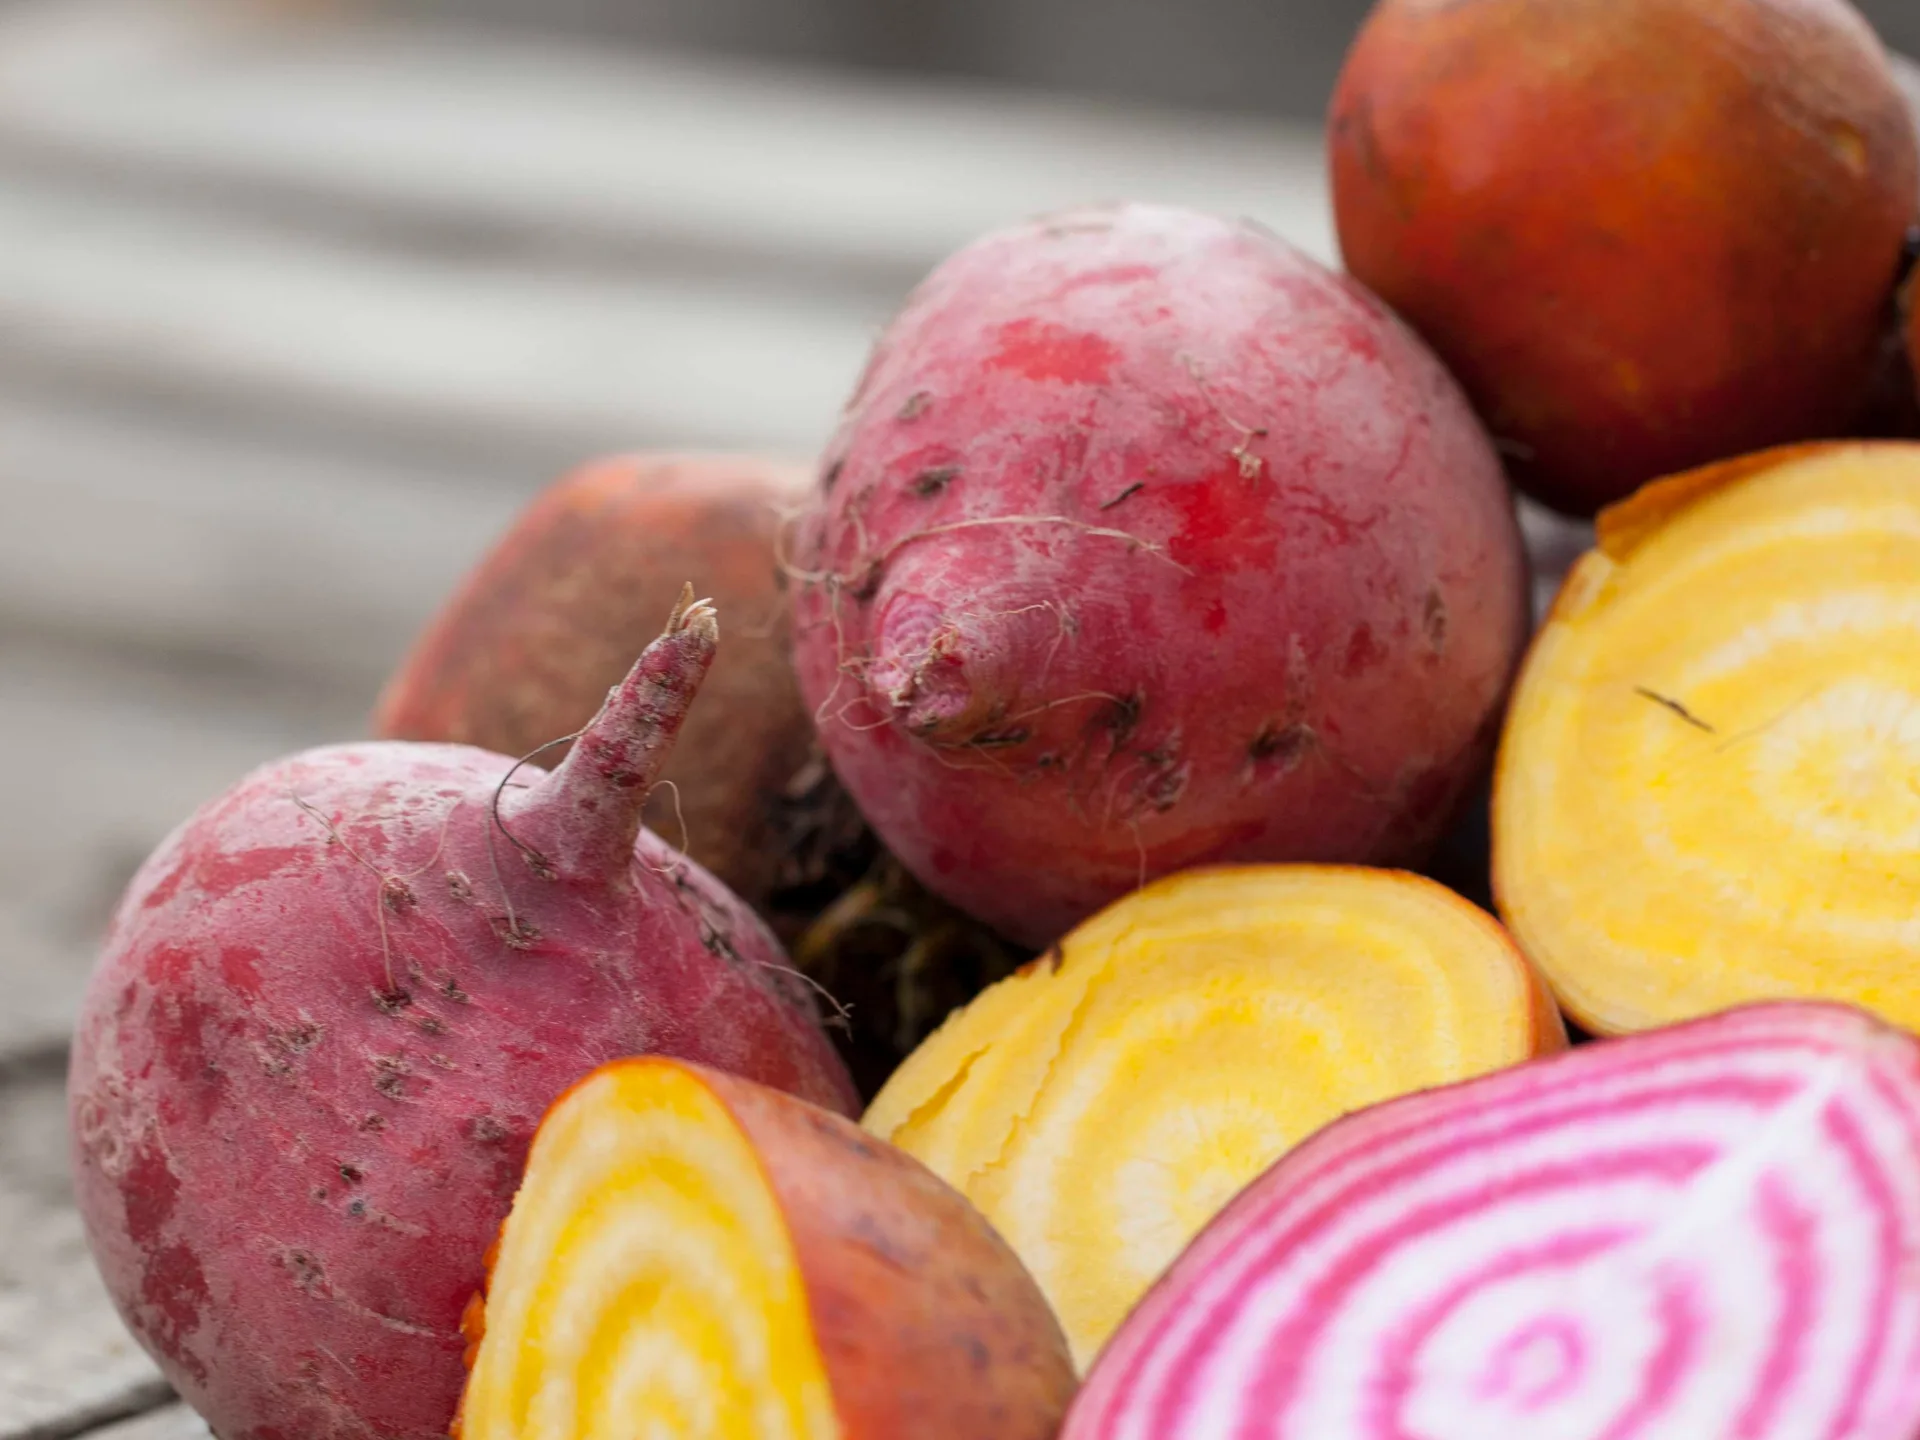 GNC Beets from GNC Farms